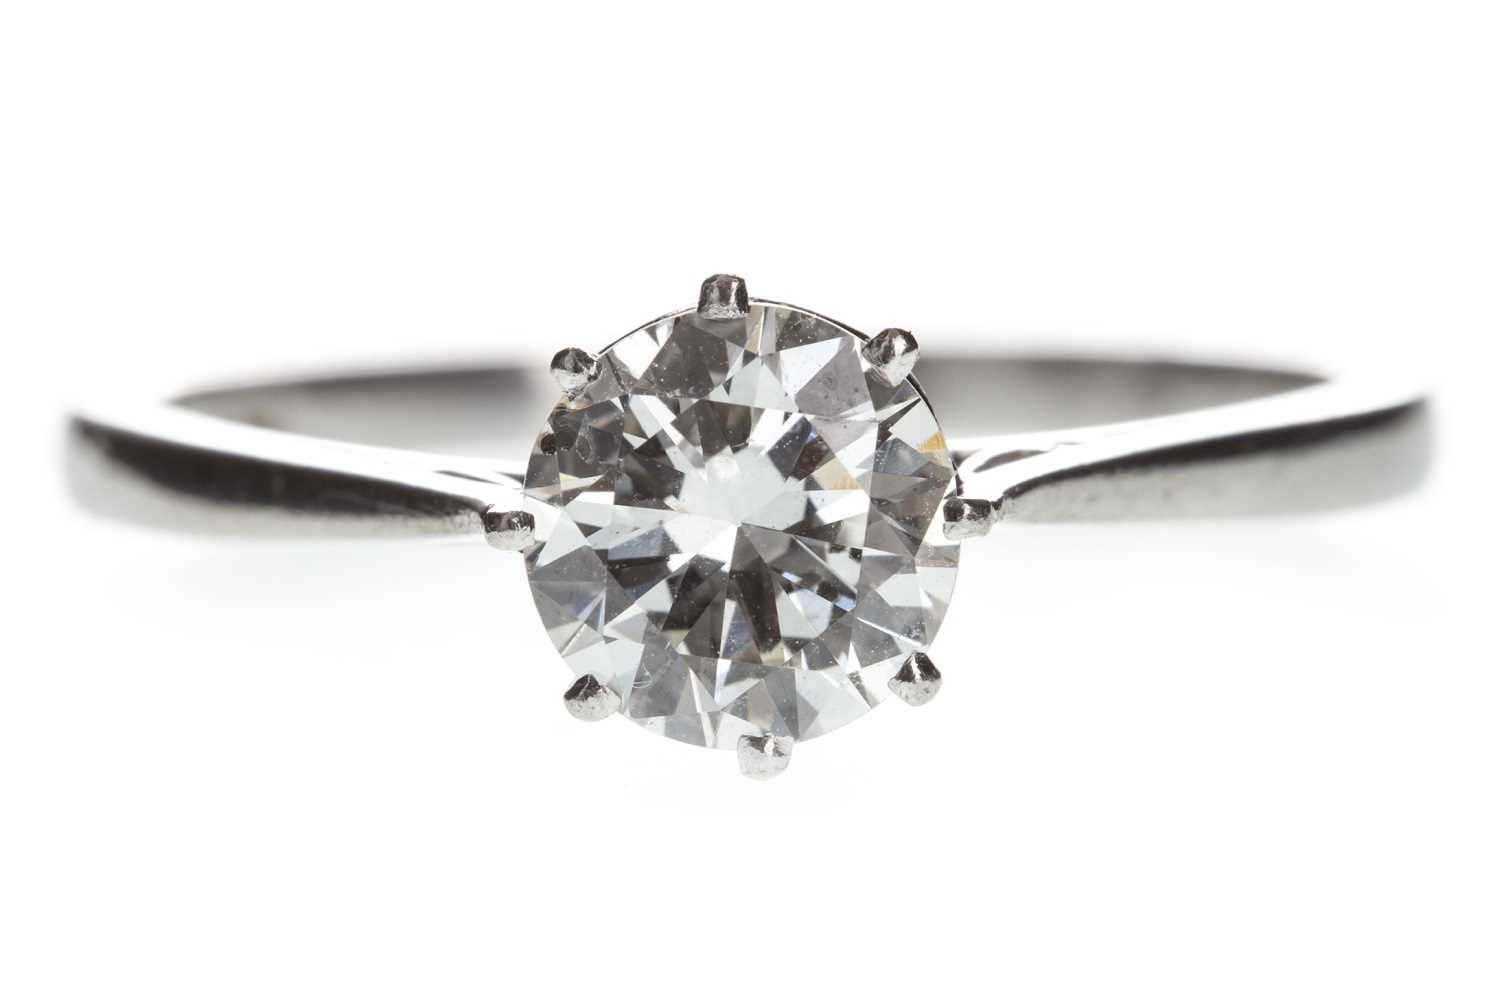 Lot 818 - A DIAMOND SOLITAIRE RING